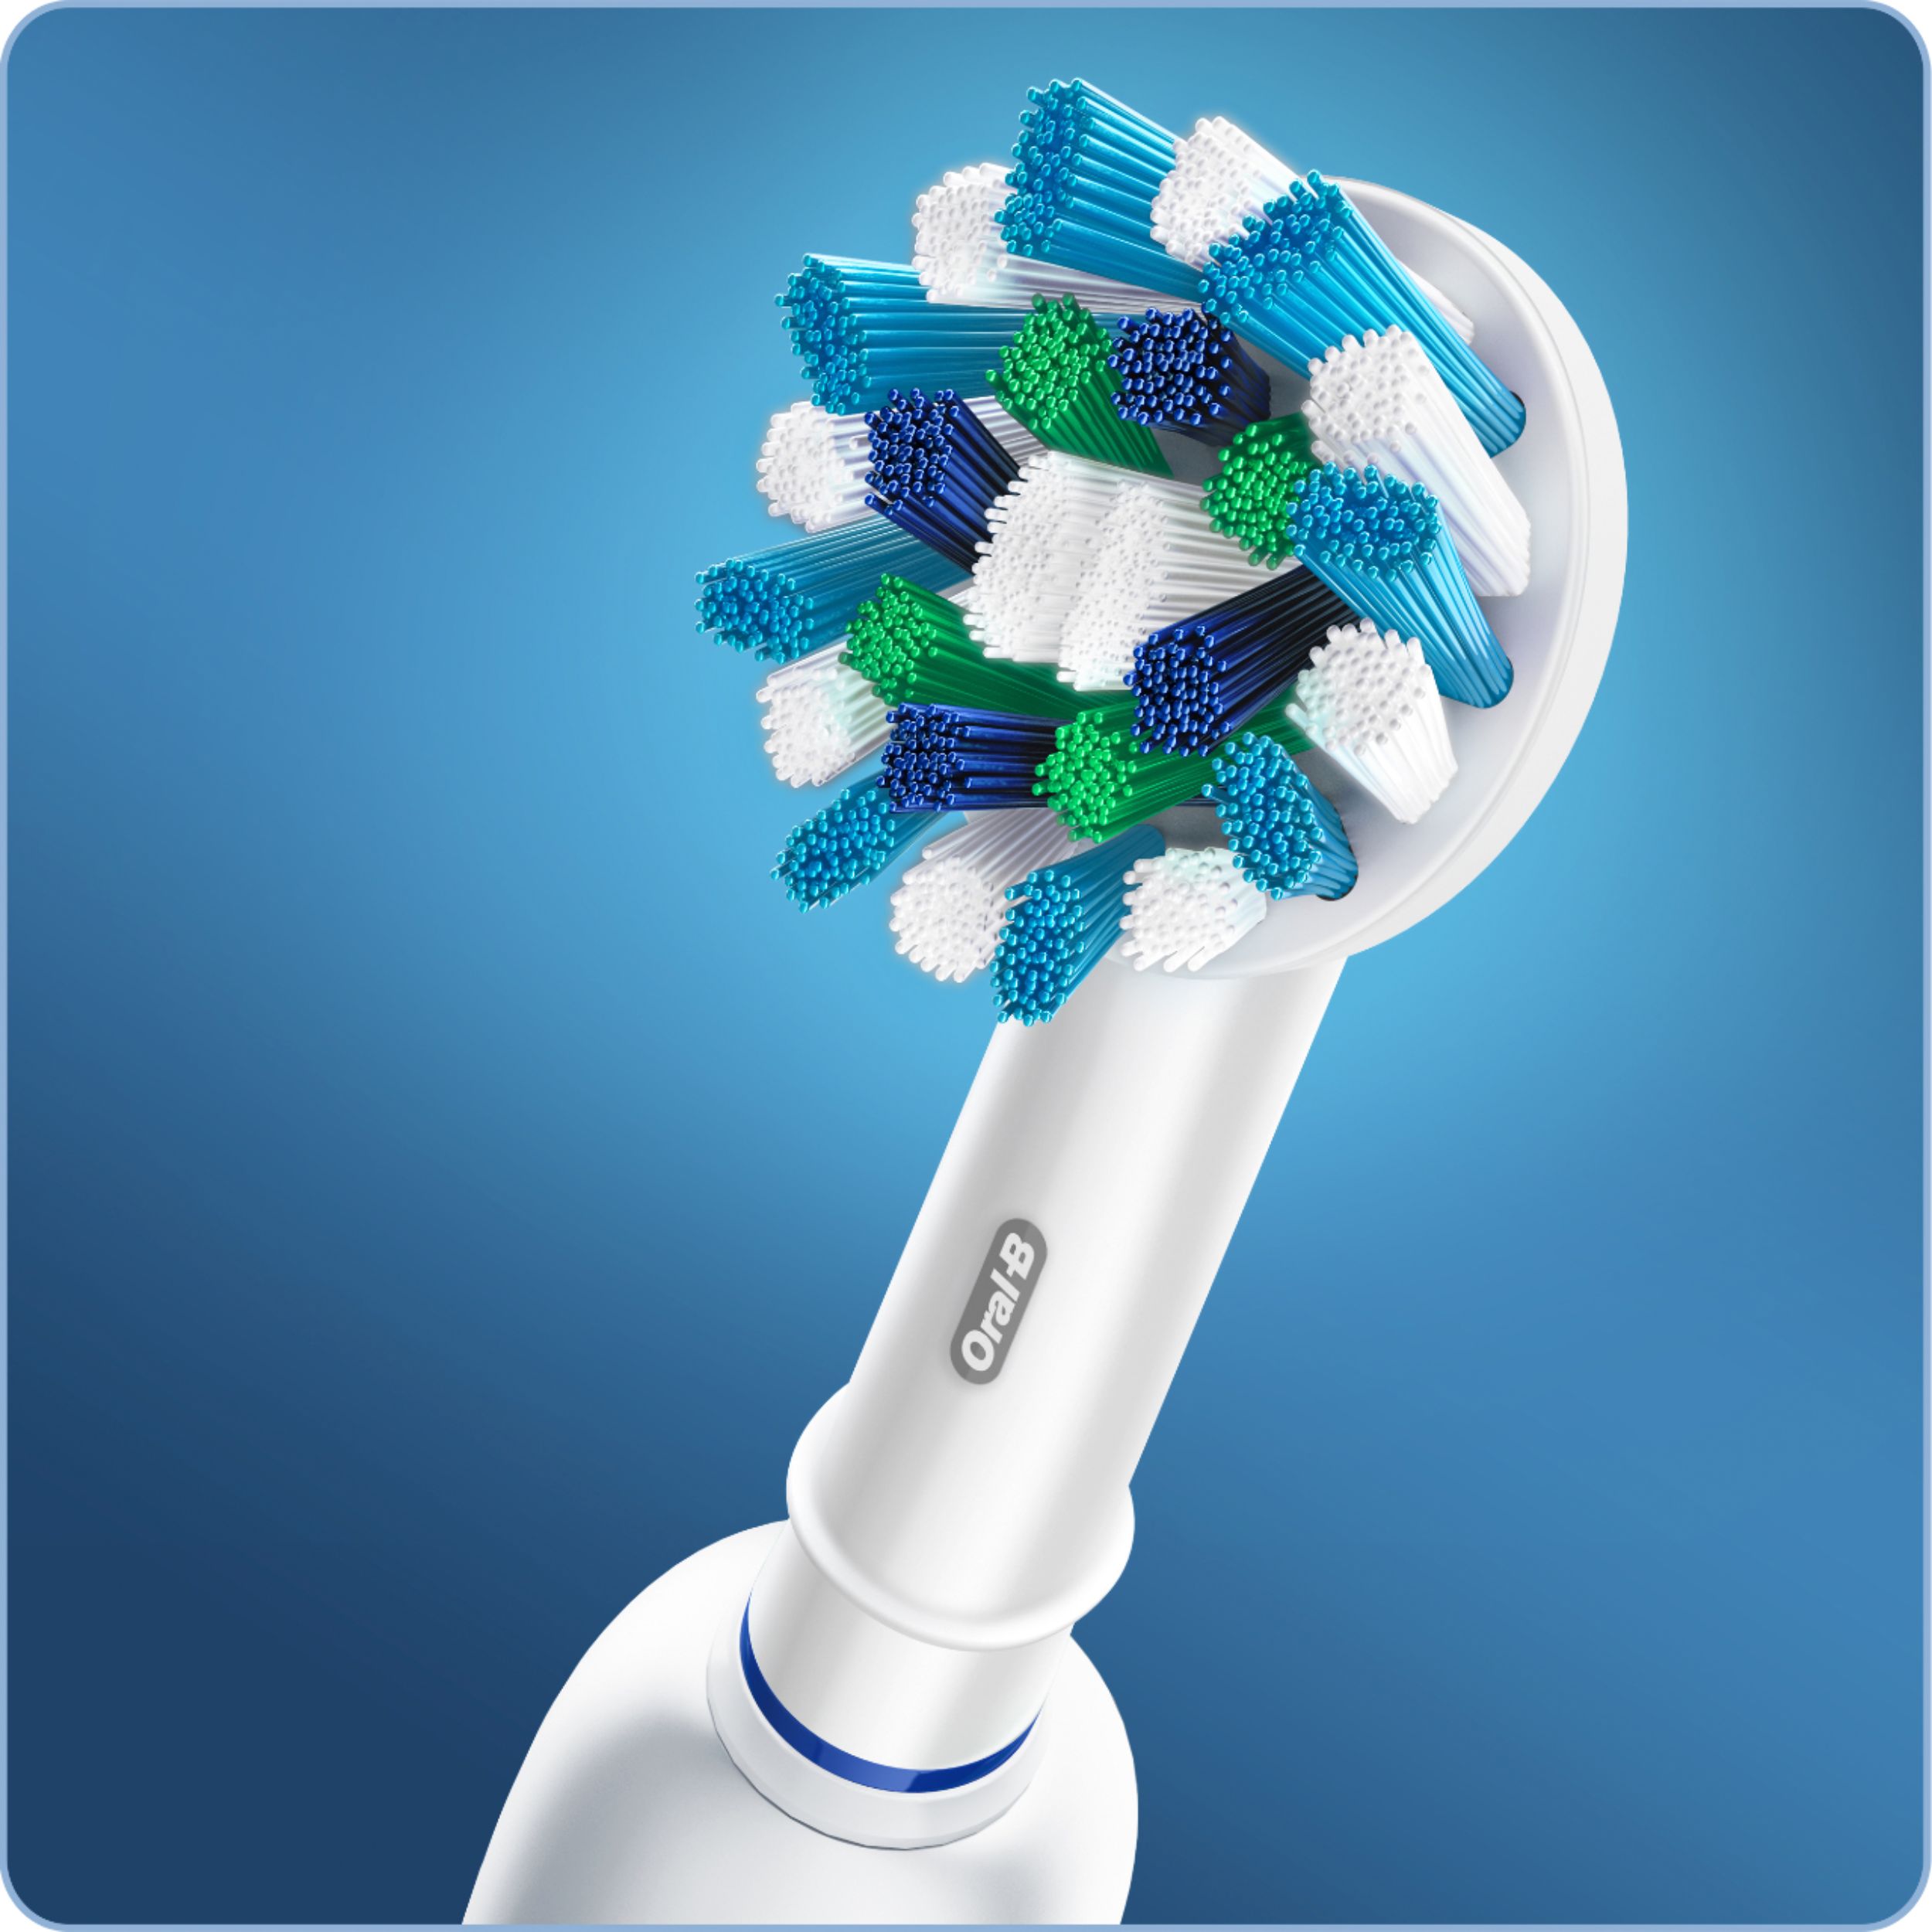 Customer Reviews: Oral-B CrossAction Replacement Brush Heads (4-Pack ...